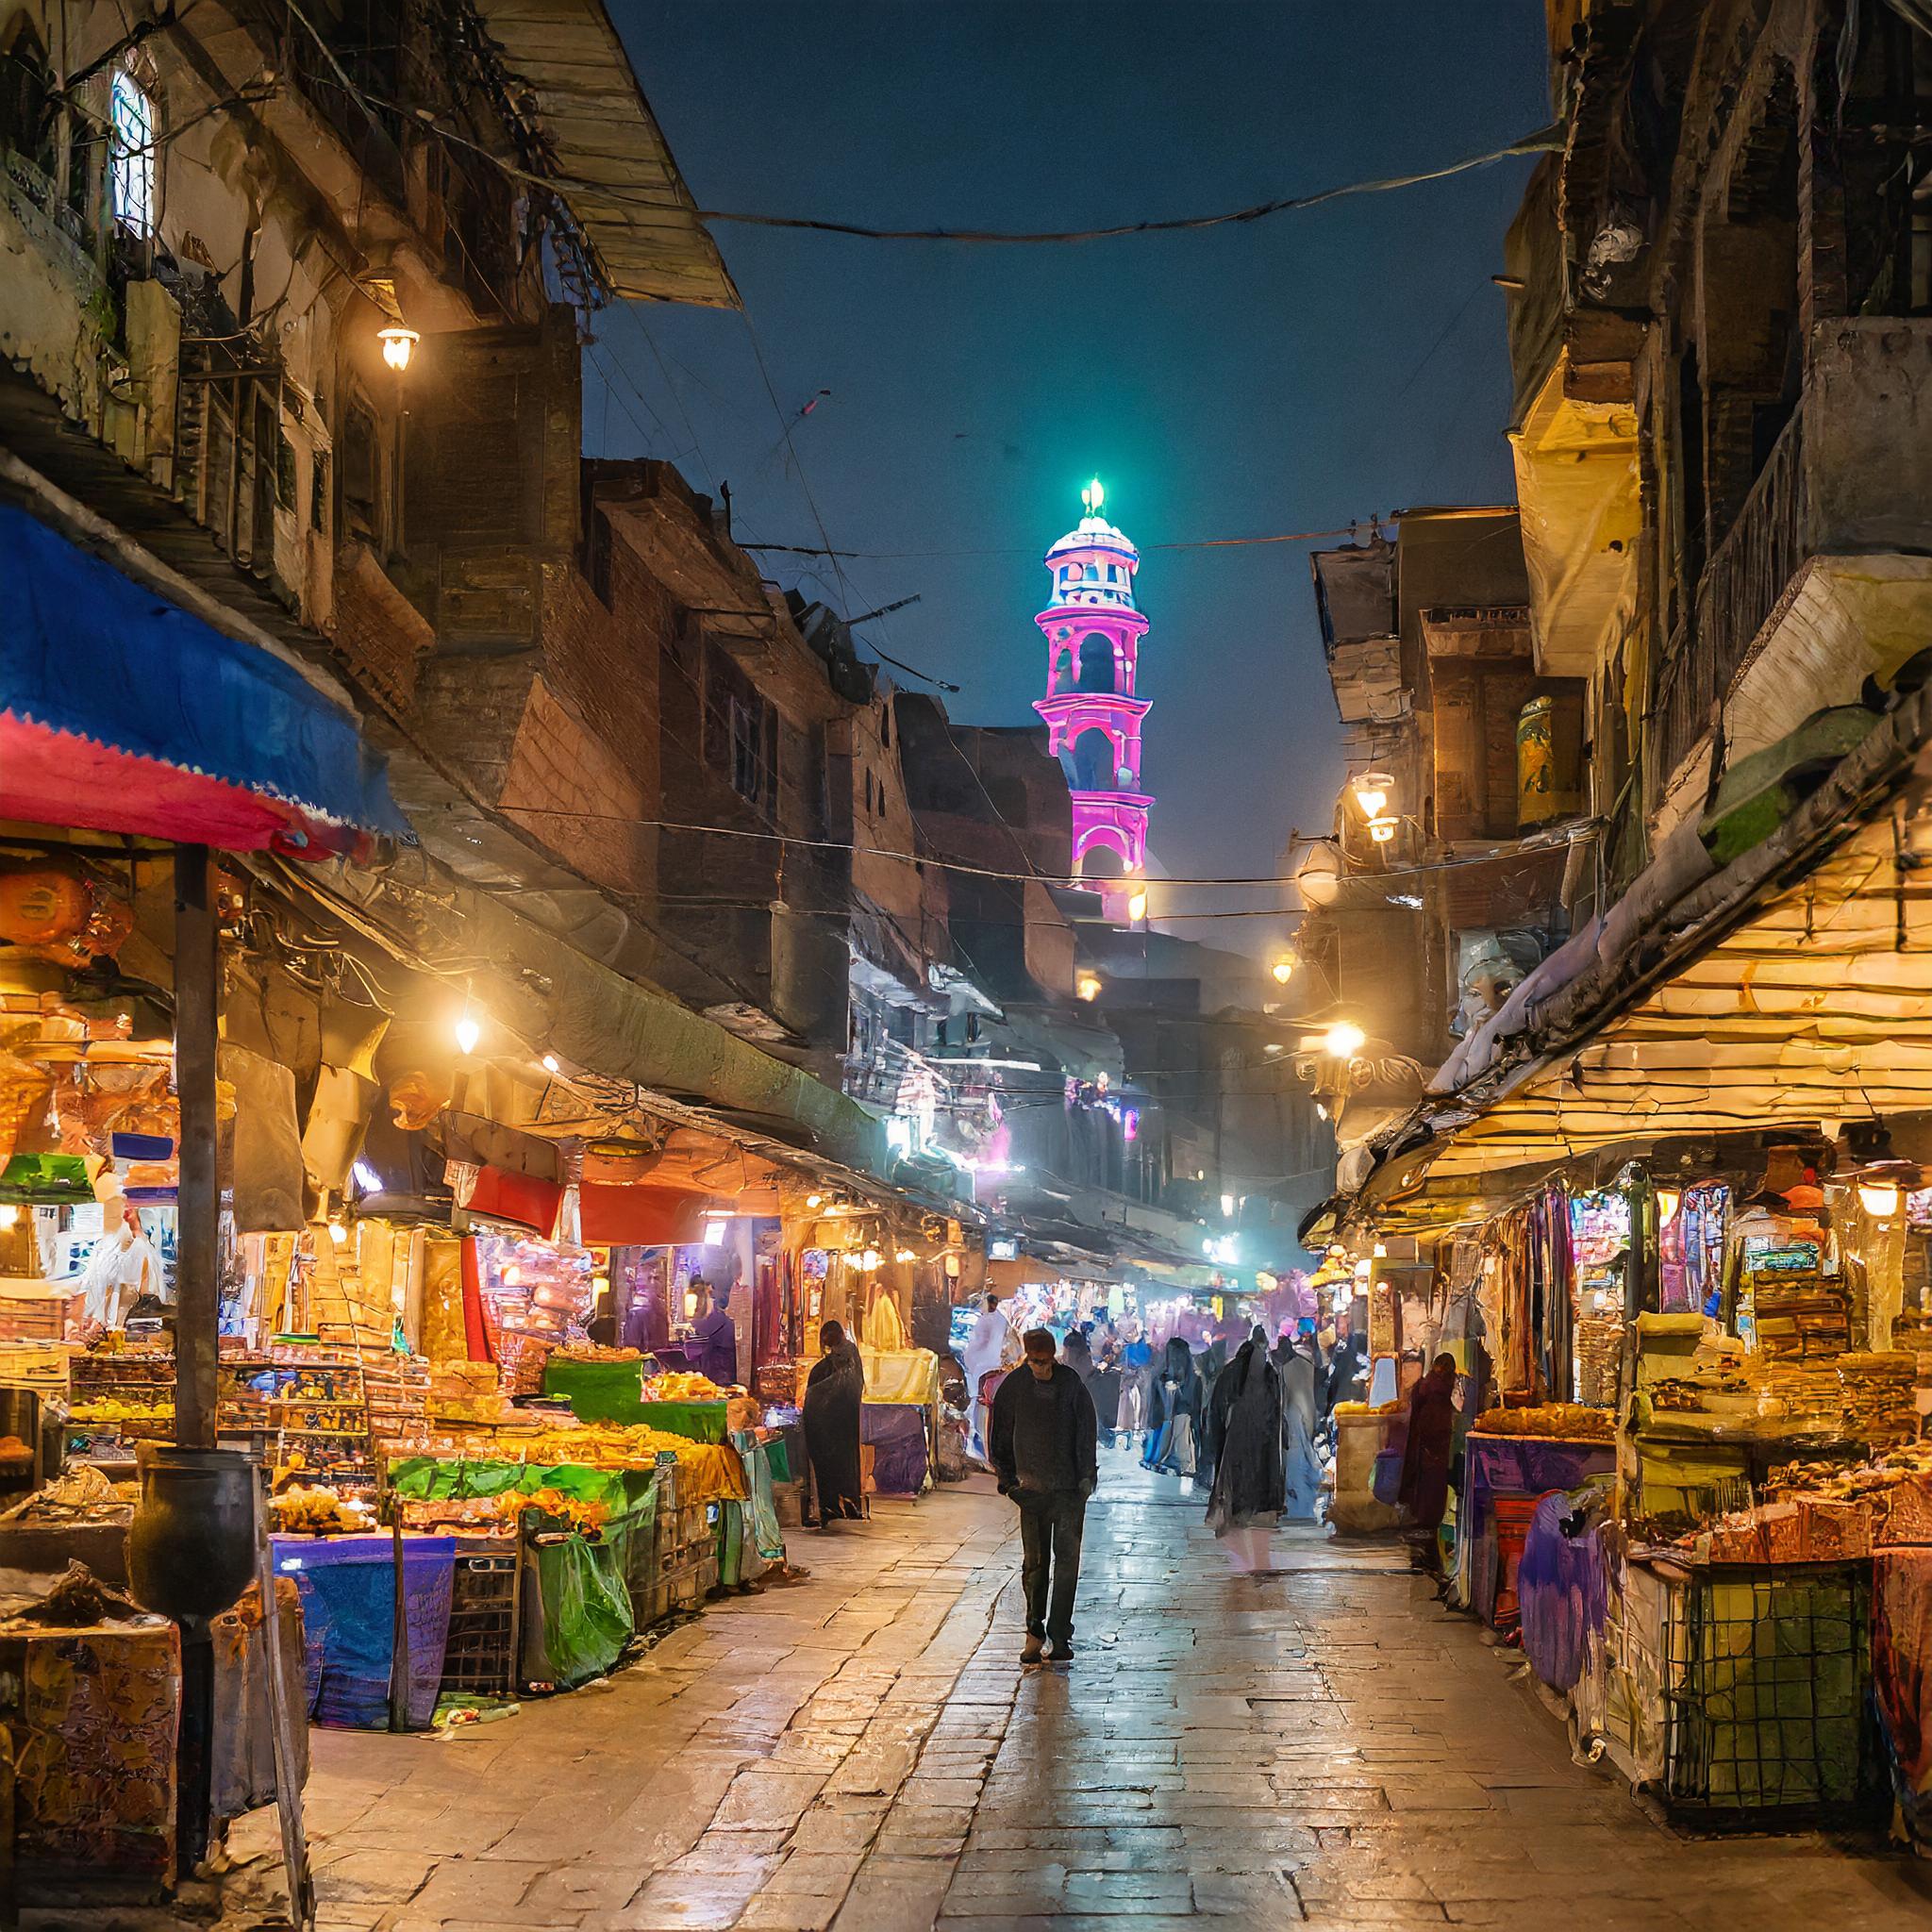  Firefly lahore pakistain streets filled with bazaar, night lights, people